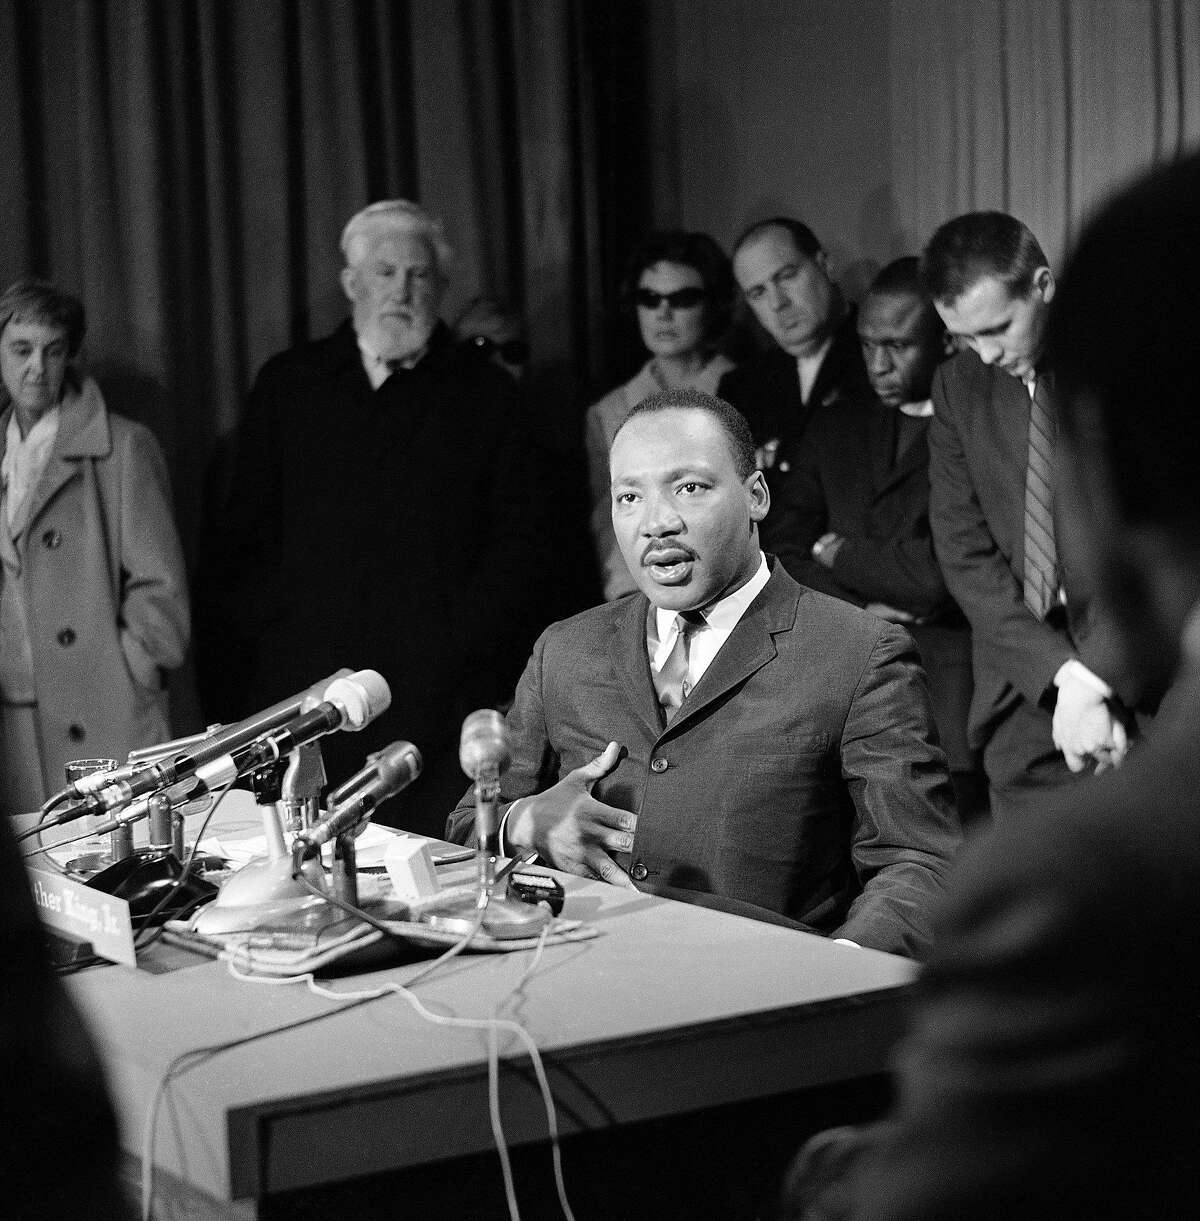 Dr. Martin Luther King speaks from San Francisco on March 28, 1965 on a television program originating in Washington (“Meet the Press”) and announced him intention of asking an economic boycott on goods made in Alabama. King spoke to an overflow crowd in Grace Cathedral atop Nob Hill in San Francisco. (AP Photo)